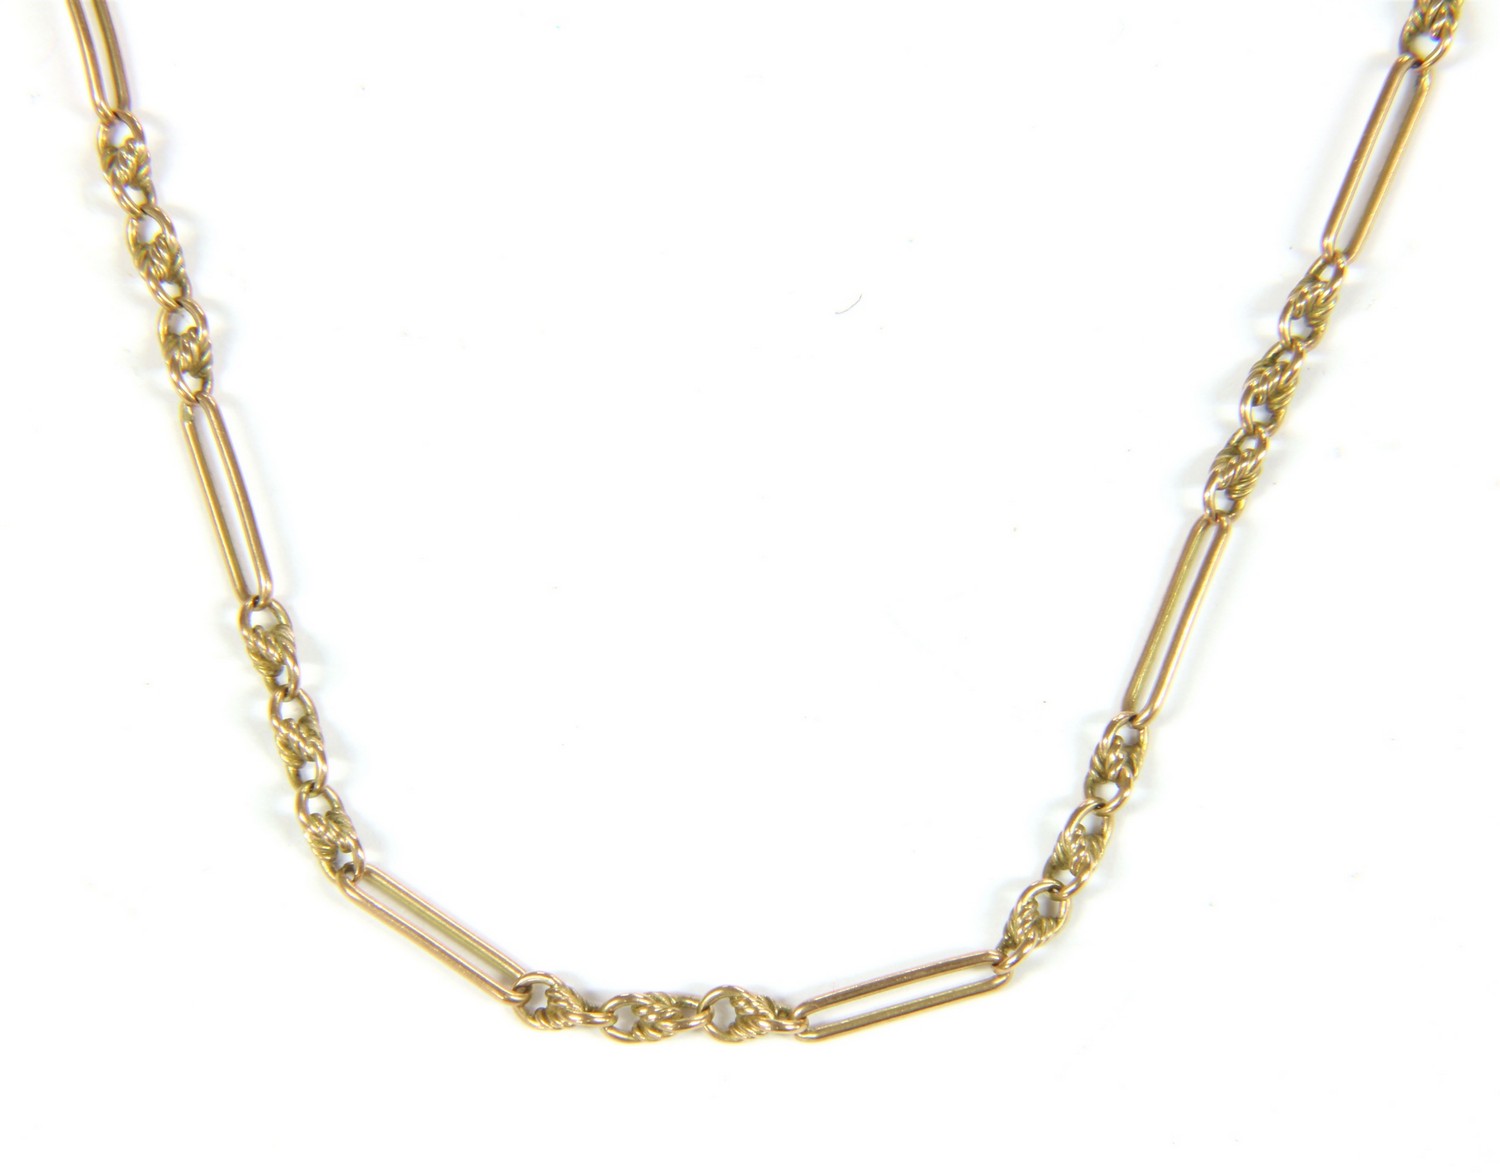 A gold fetter and three link necklace